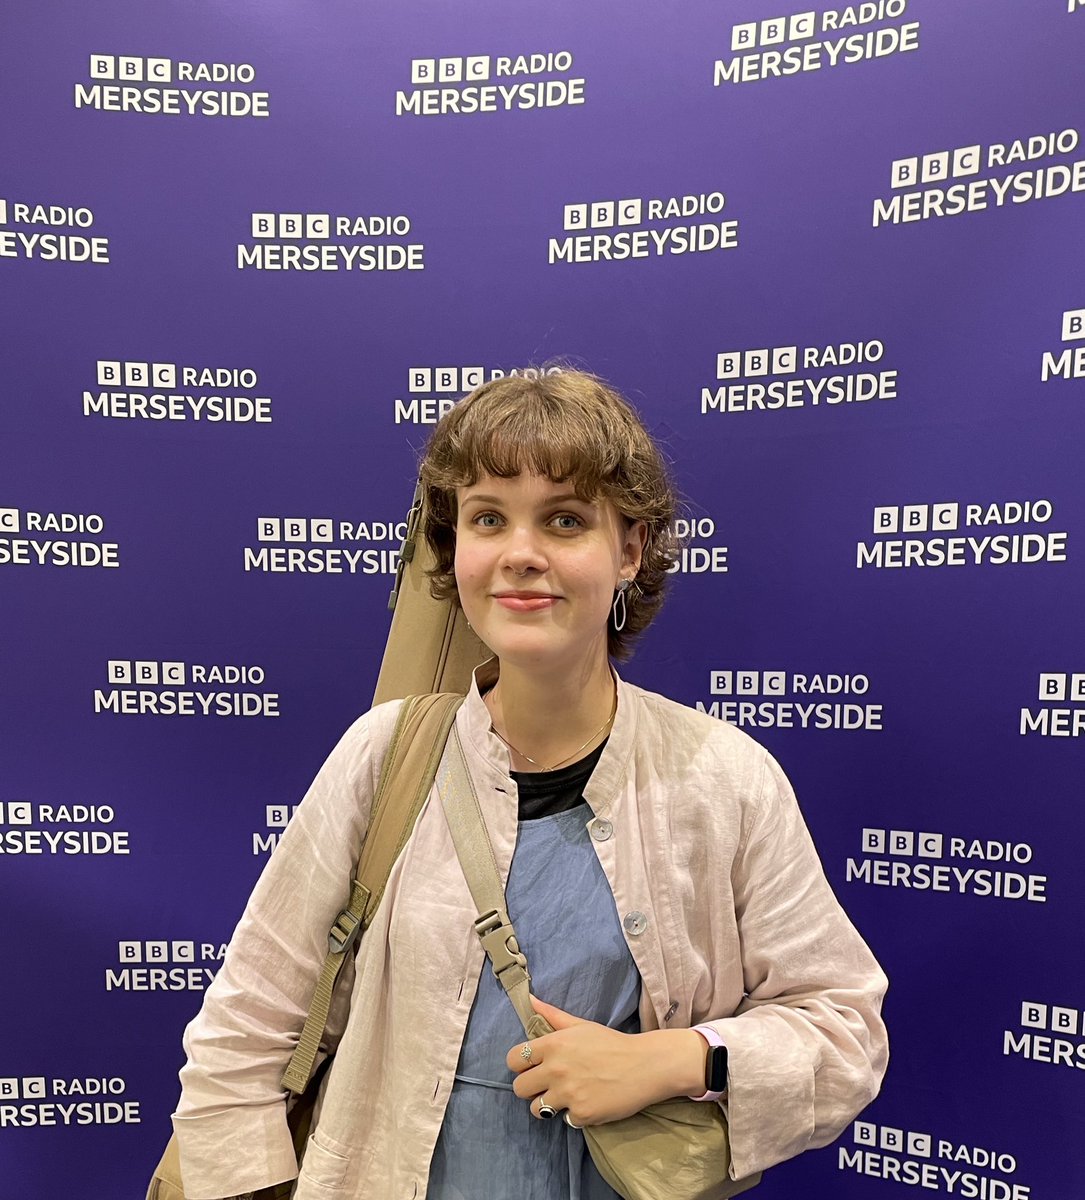 Tune in to @bbcmerseyside tonight at 8pm to hear me play two songs from the EP live in the studio! Thank you for having me in @Dave_Monks at @bbcintroducing 🌱 We’re also chatting about my upcoming show in @liverpoolphil 16 Sept w @vidarnorheim and @lizzienunnery @lpoolacoustic